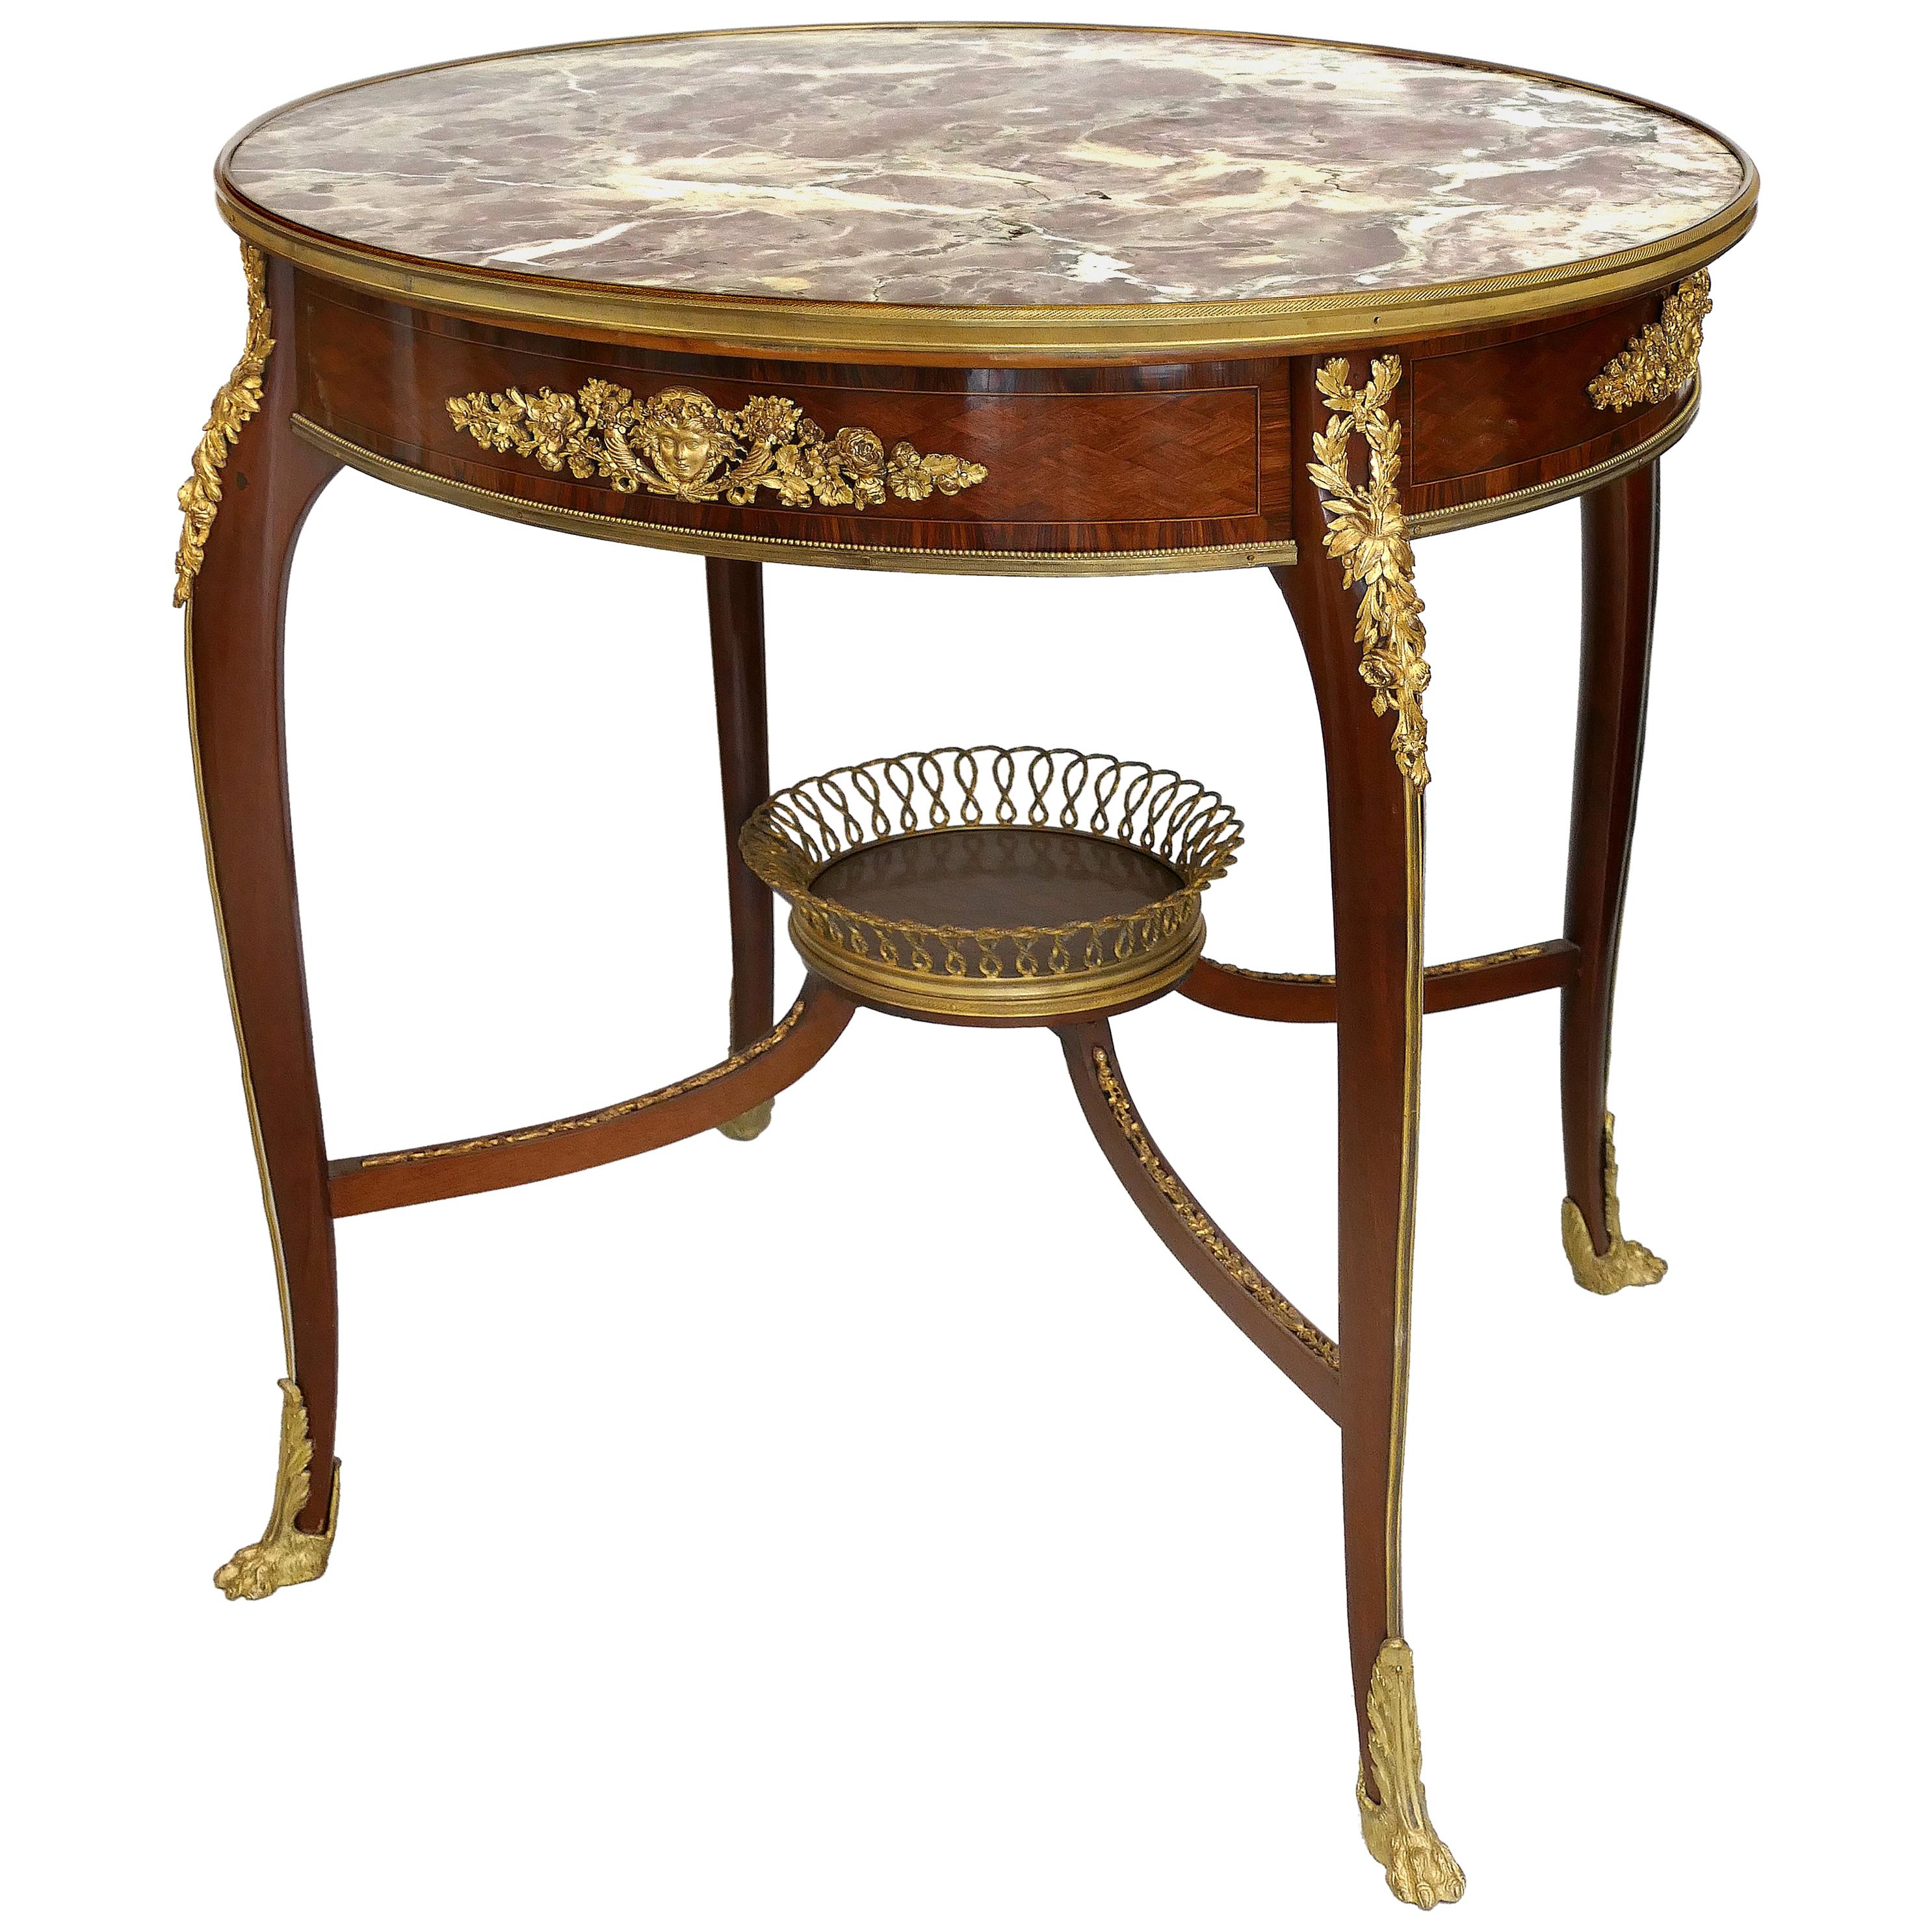 Francois Linke Center Table with Bronze Basket and Mounts, France, circa 1880